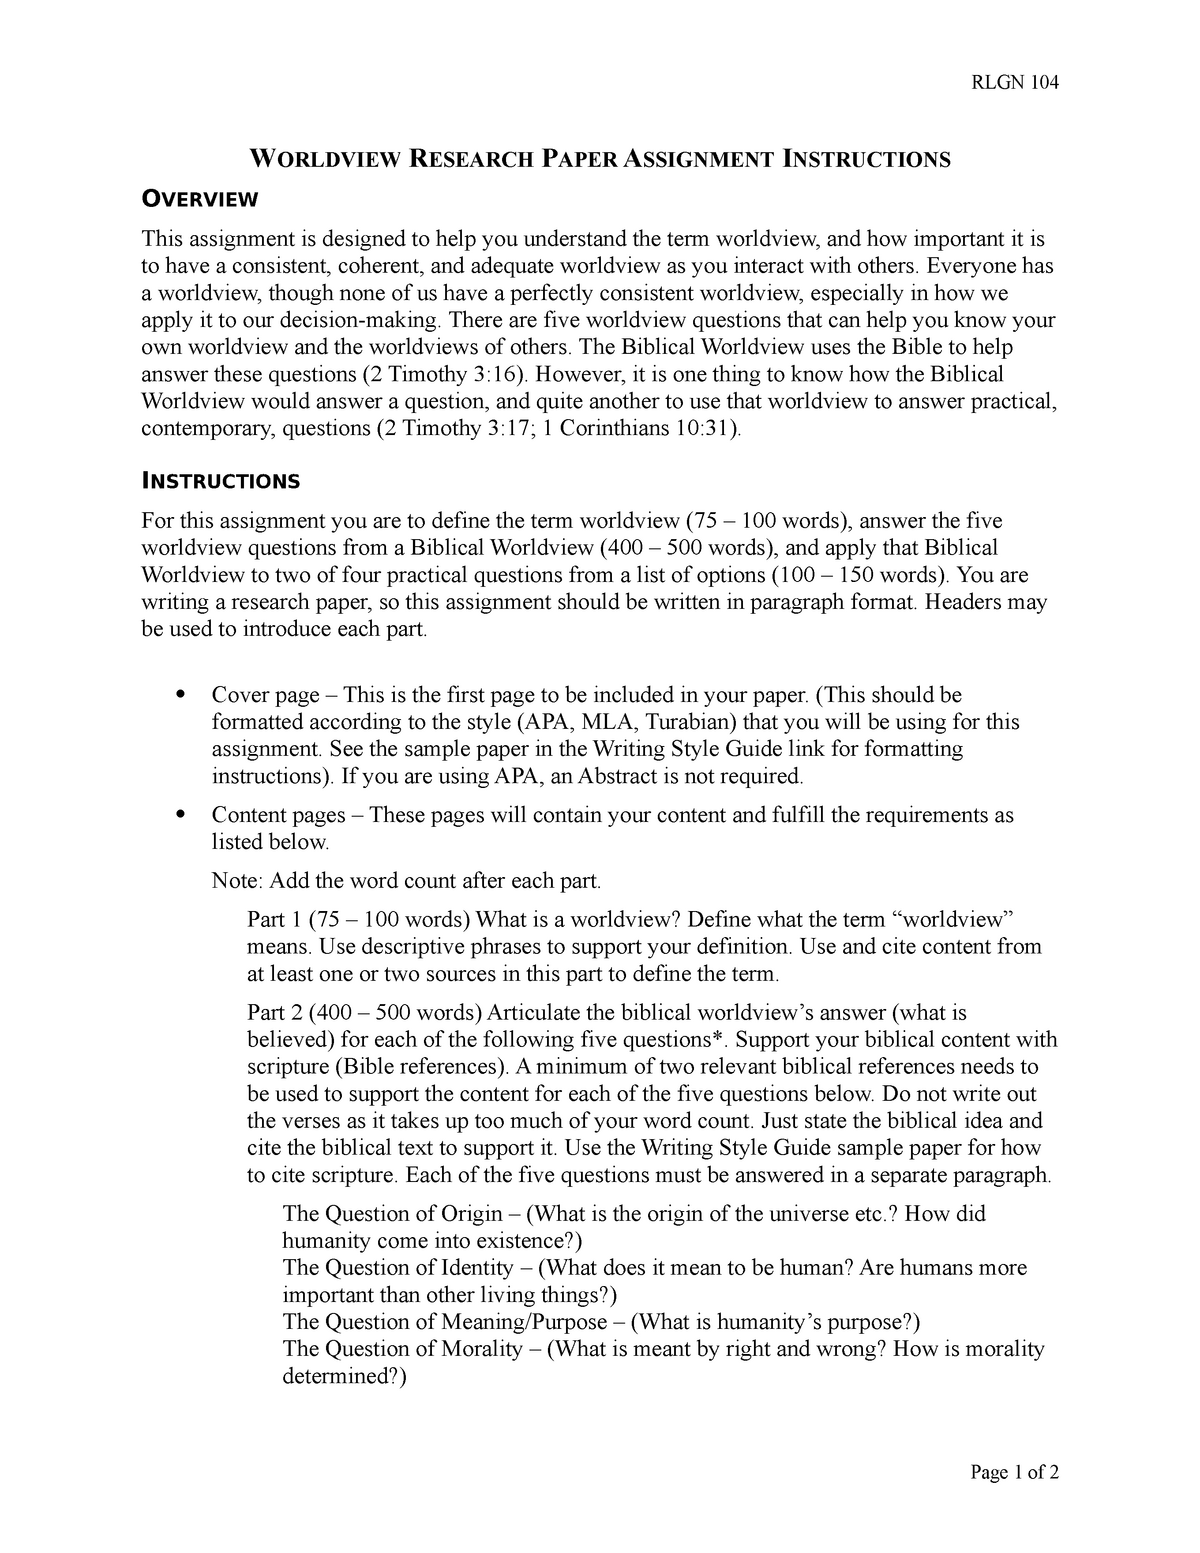 worldview research paper rlgn 104